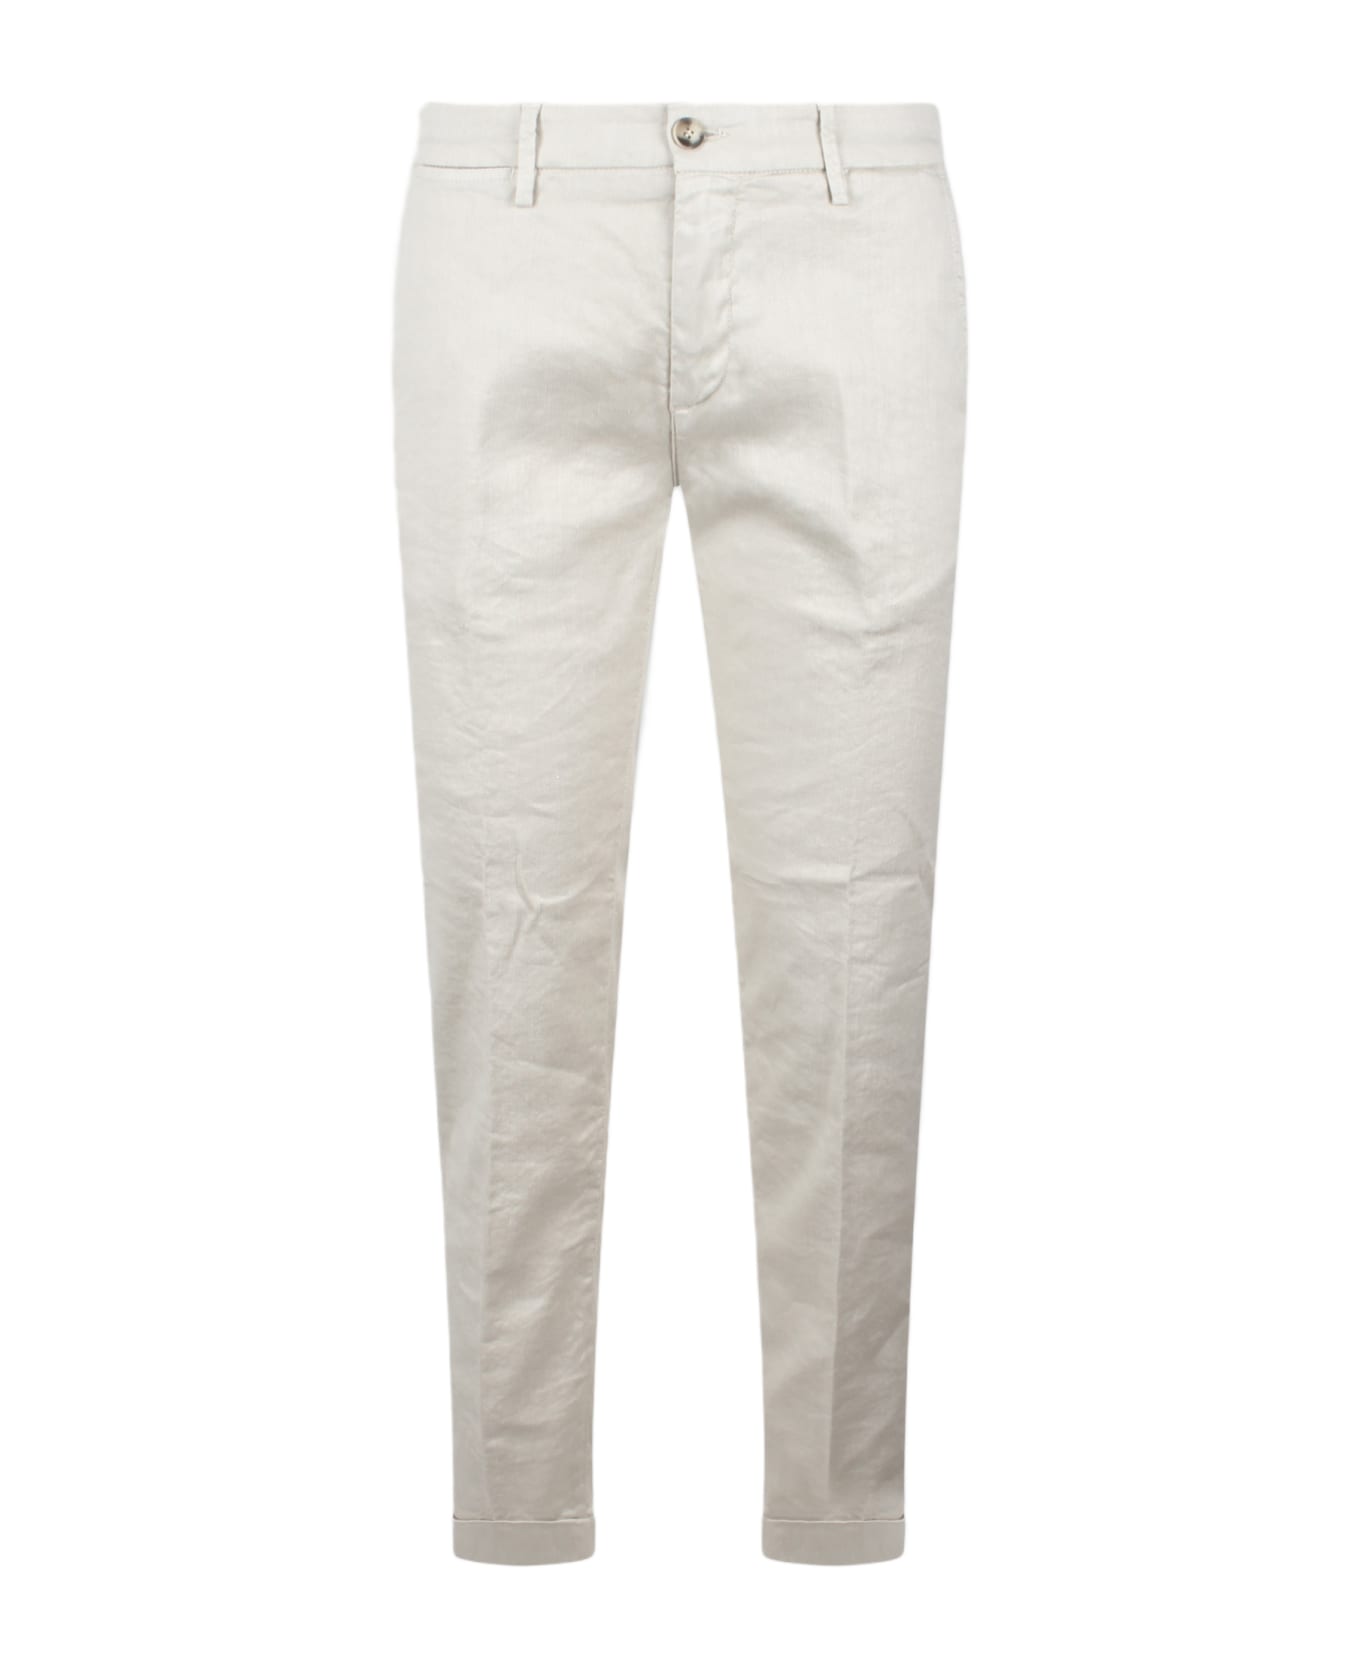 Re-HasH Mucha Chinos Pant - Nude & Neutrals